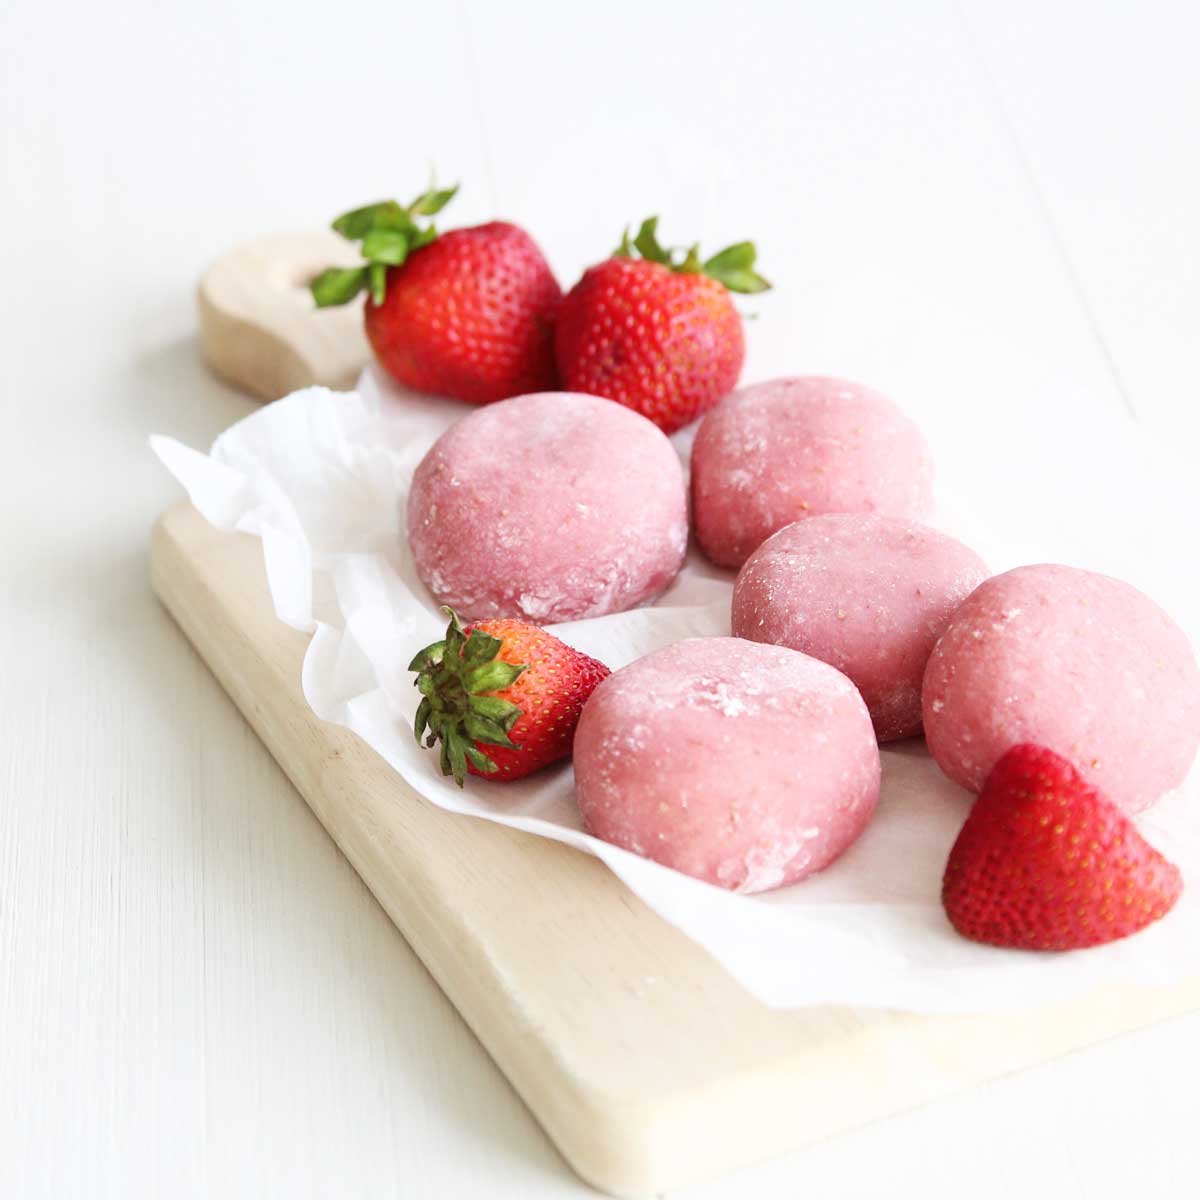 How to Make Healthy Strawberry Mochi (Made in the Microwave) - Strawberry Japanese Roll Cake